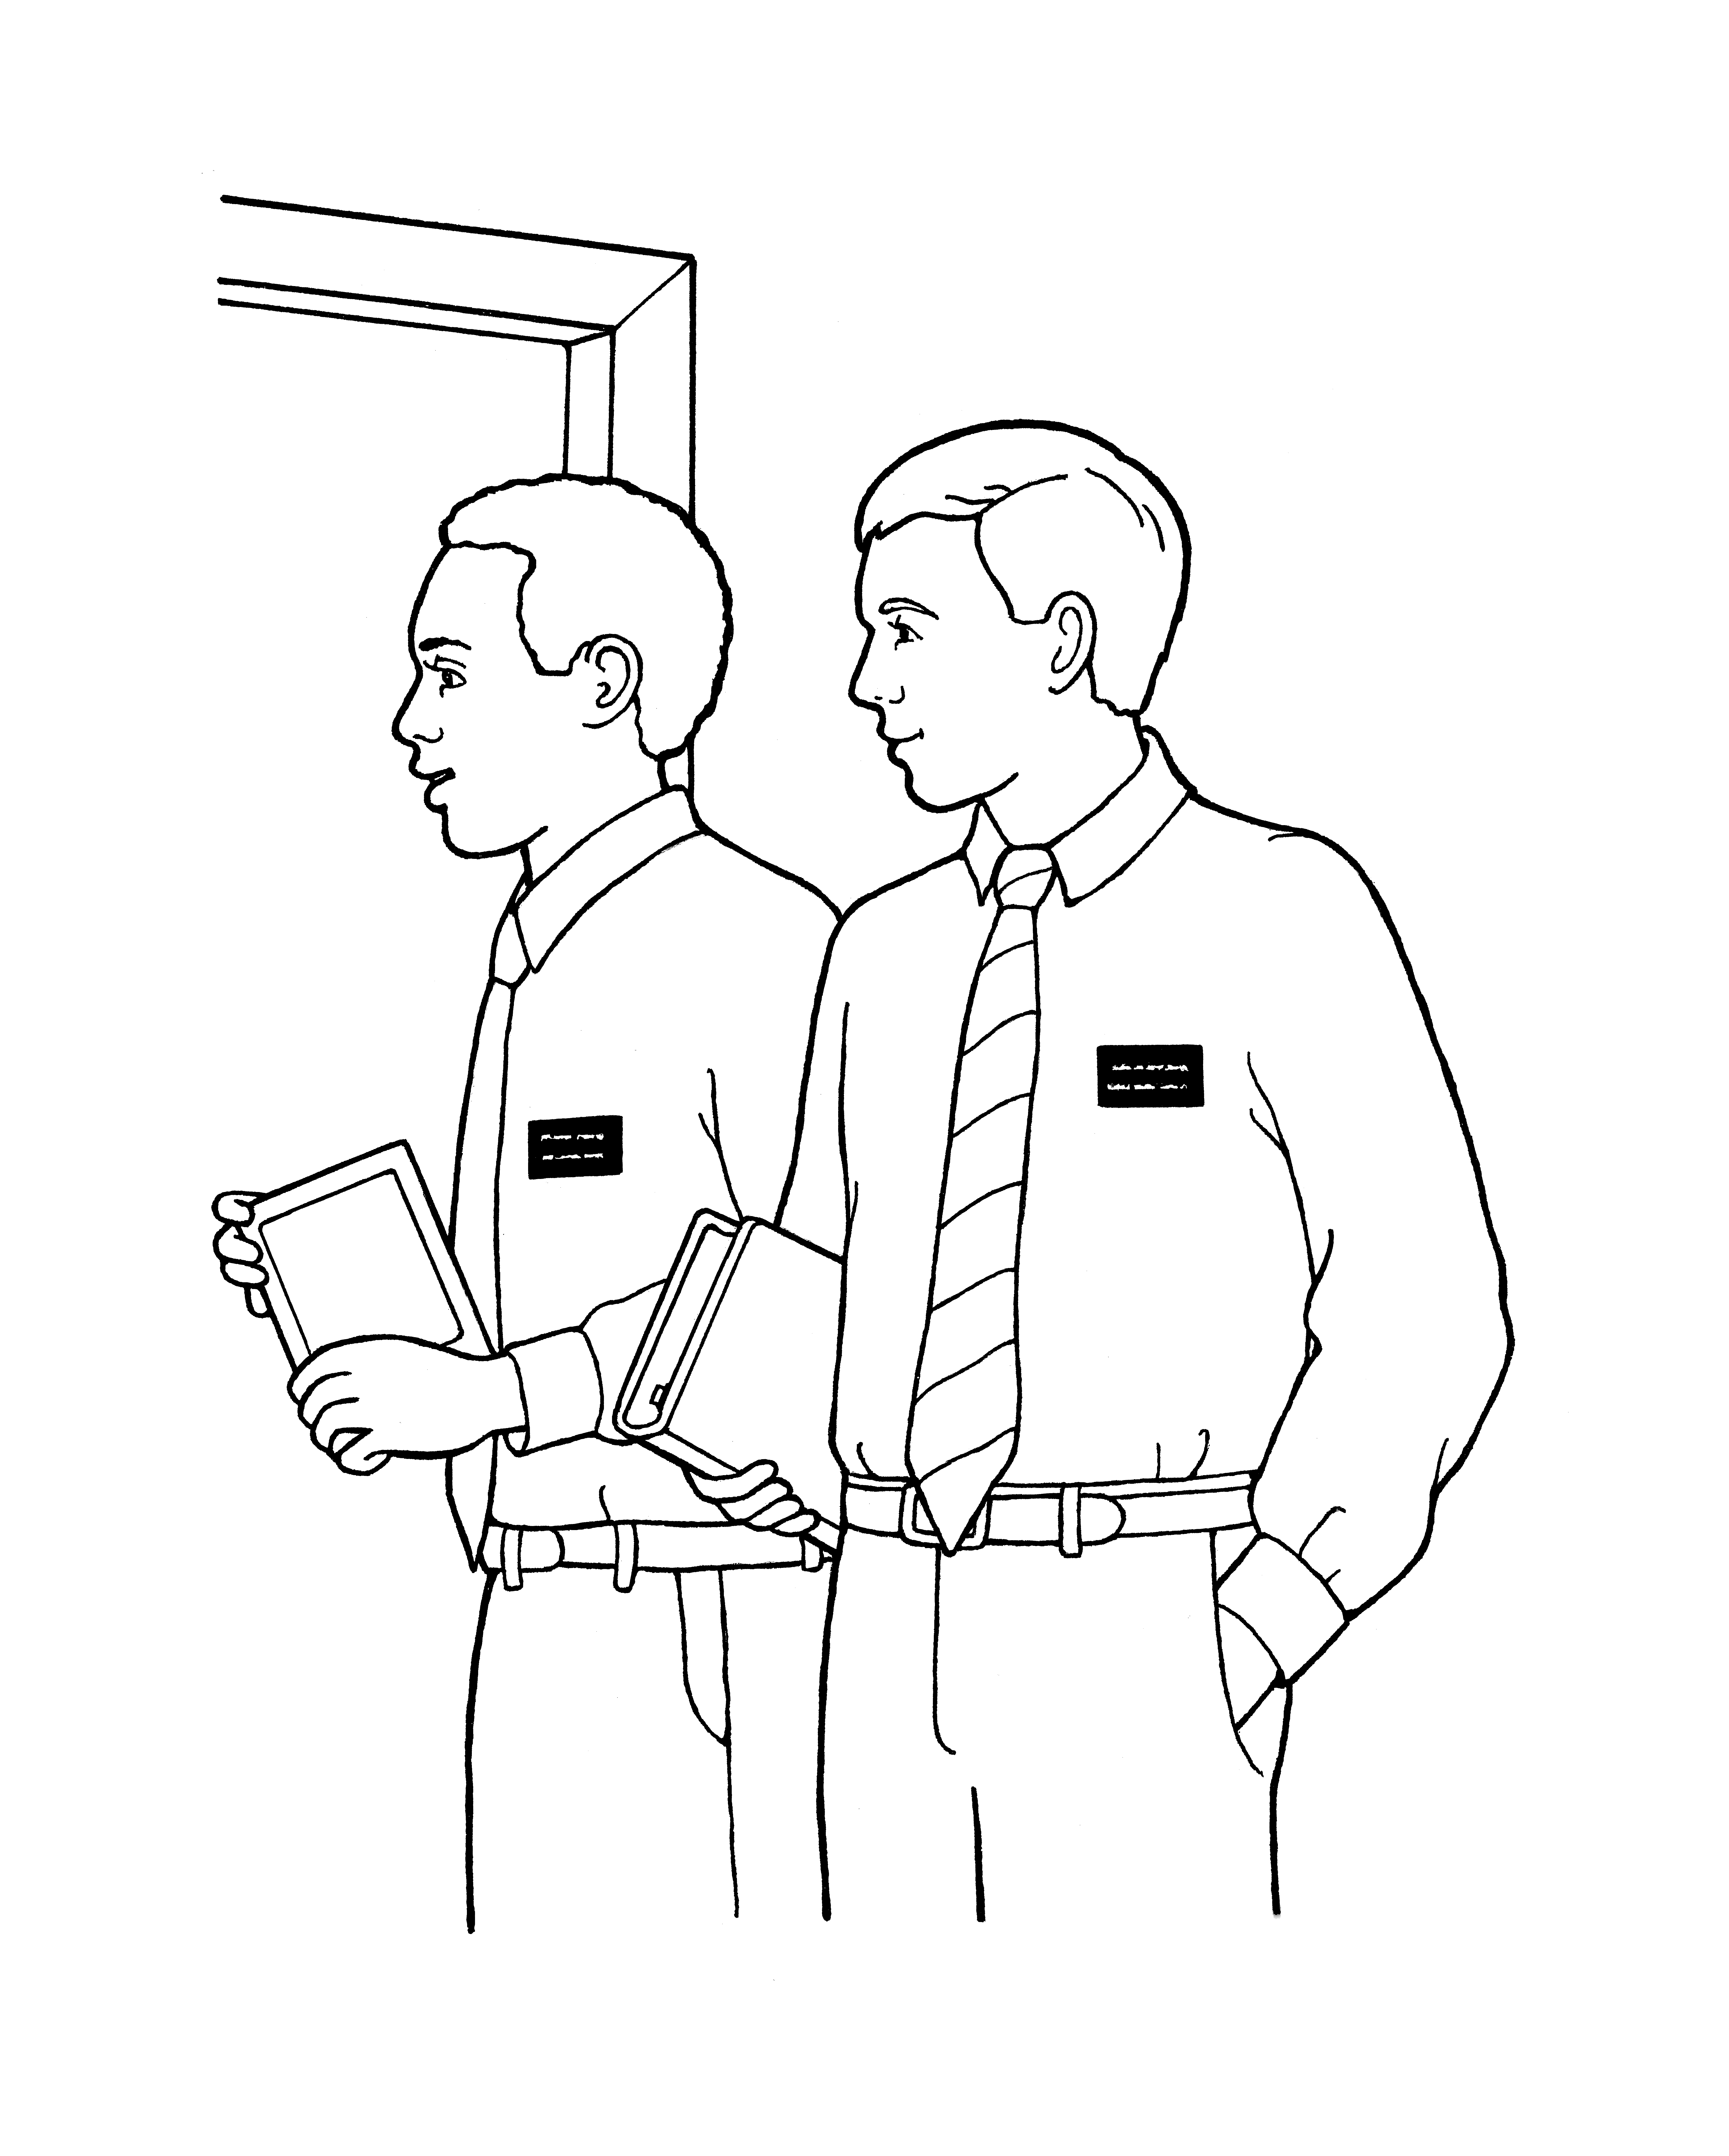 An illustration of the tenth article of faith—“Ten Tribes” (two elder missionaries knocking on a door).